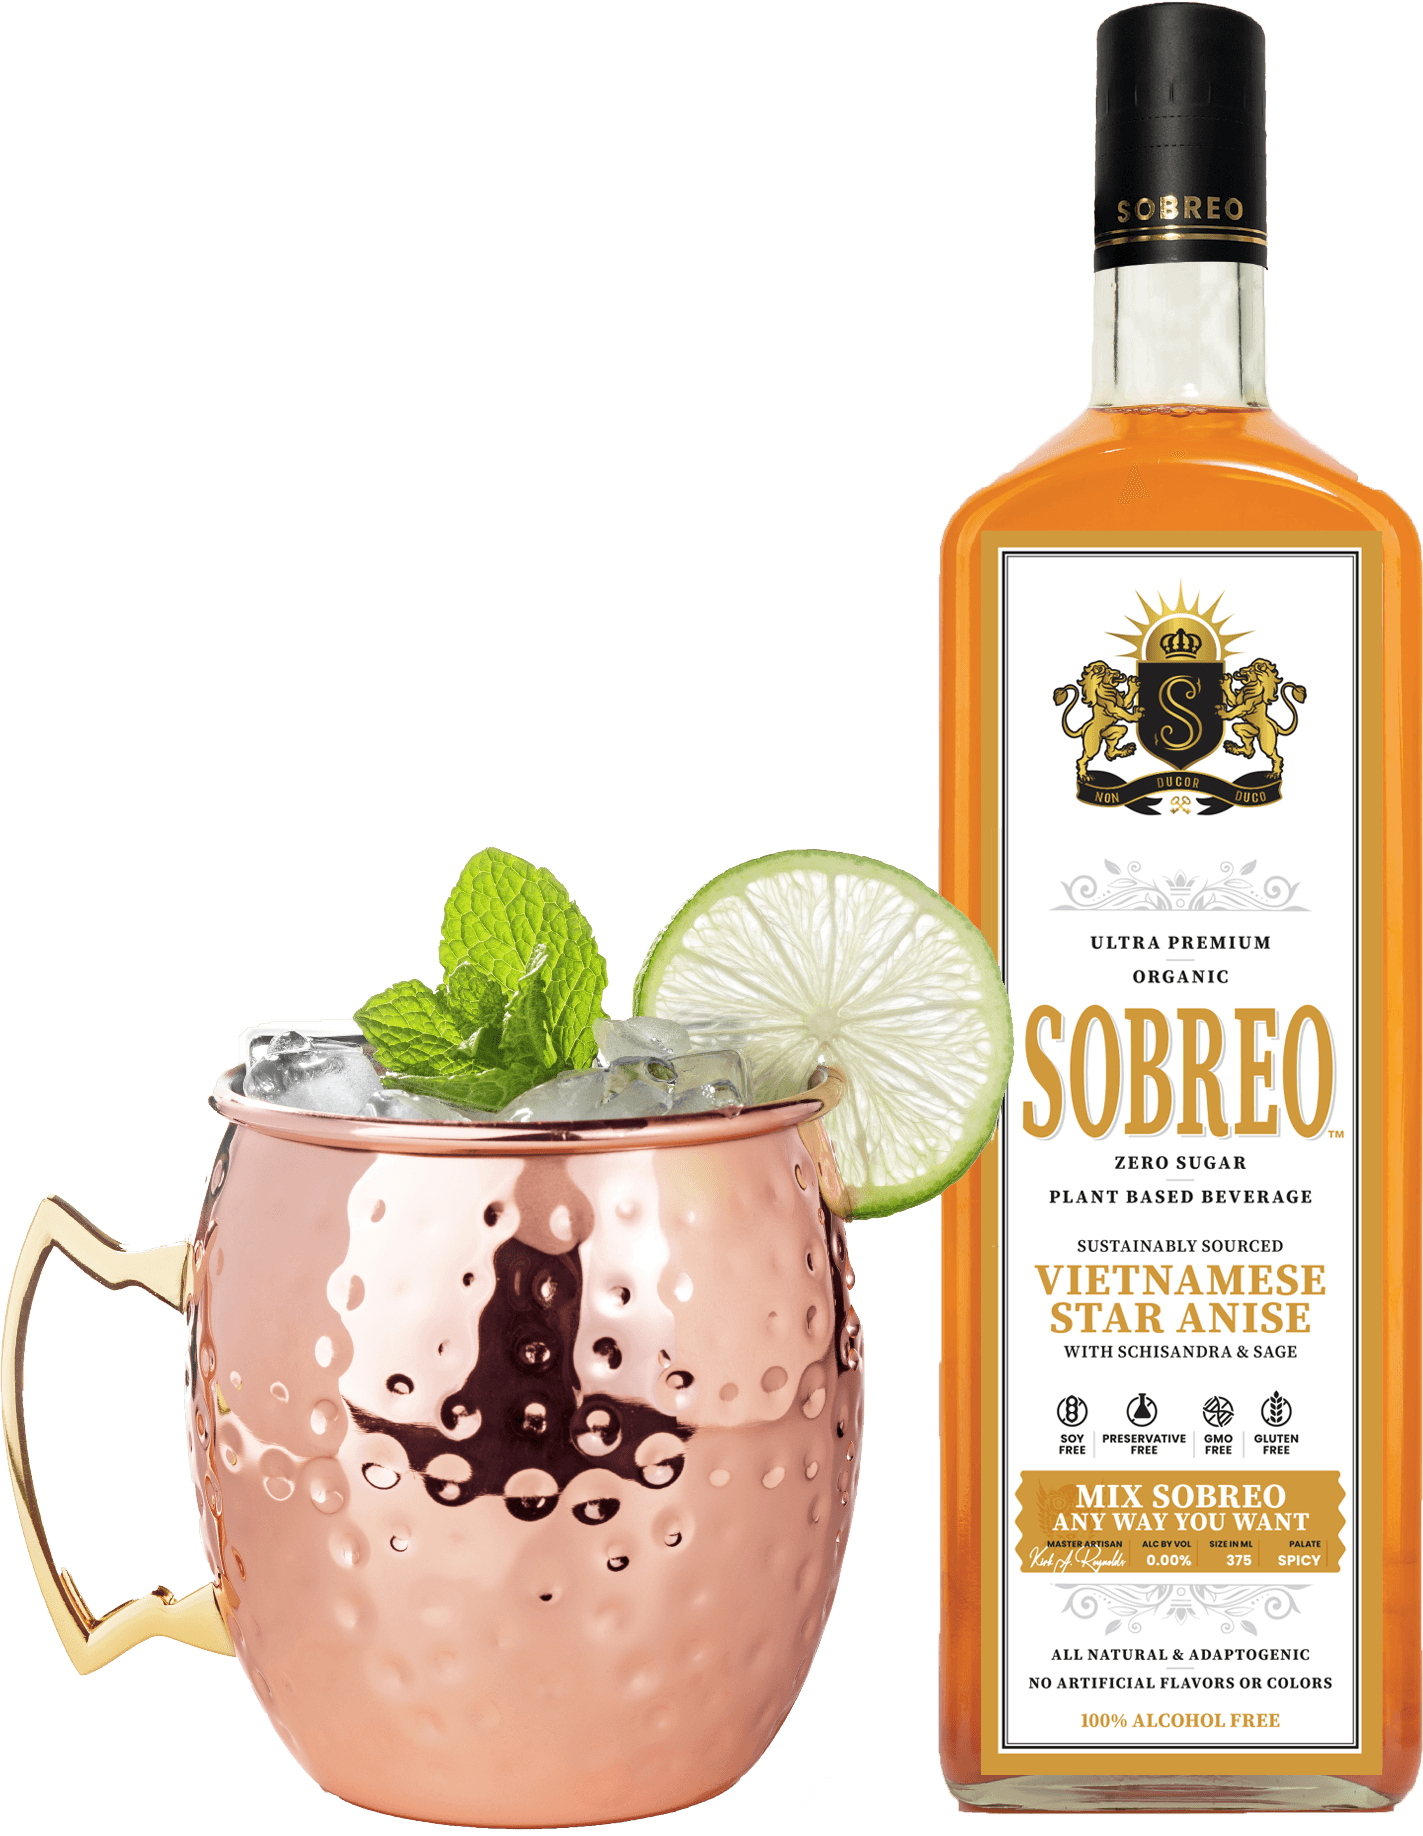 Sobreo non alcoholic cocktail and mocktail mixer in Vietnamese Star Anise spicy flavor perfect to infuse into a Moscow Mule gin recipe